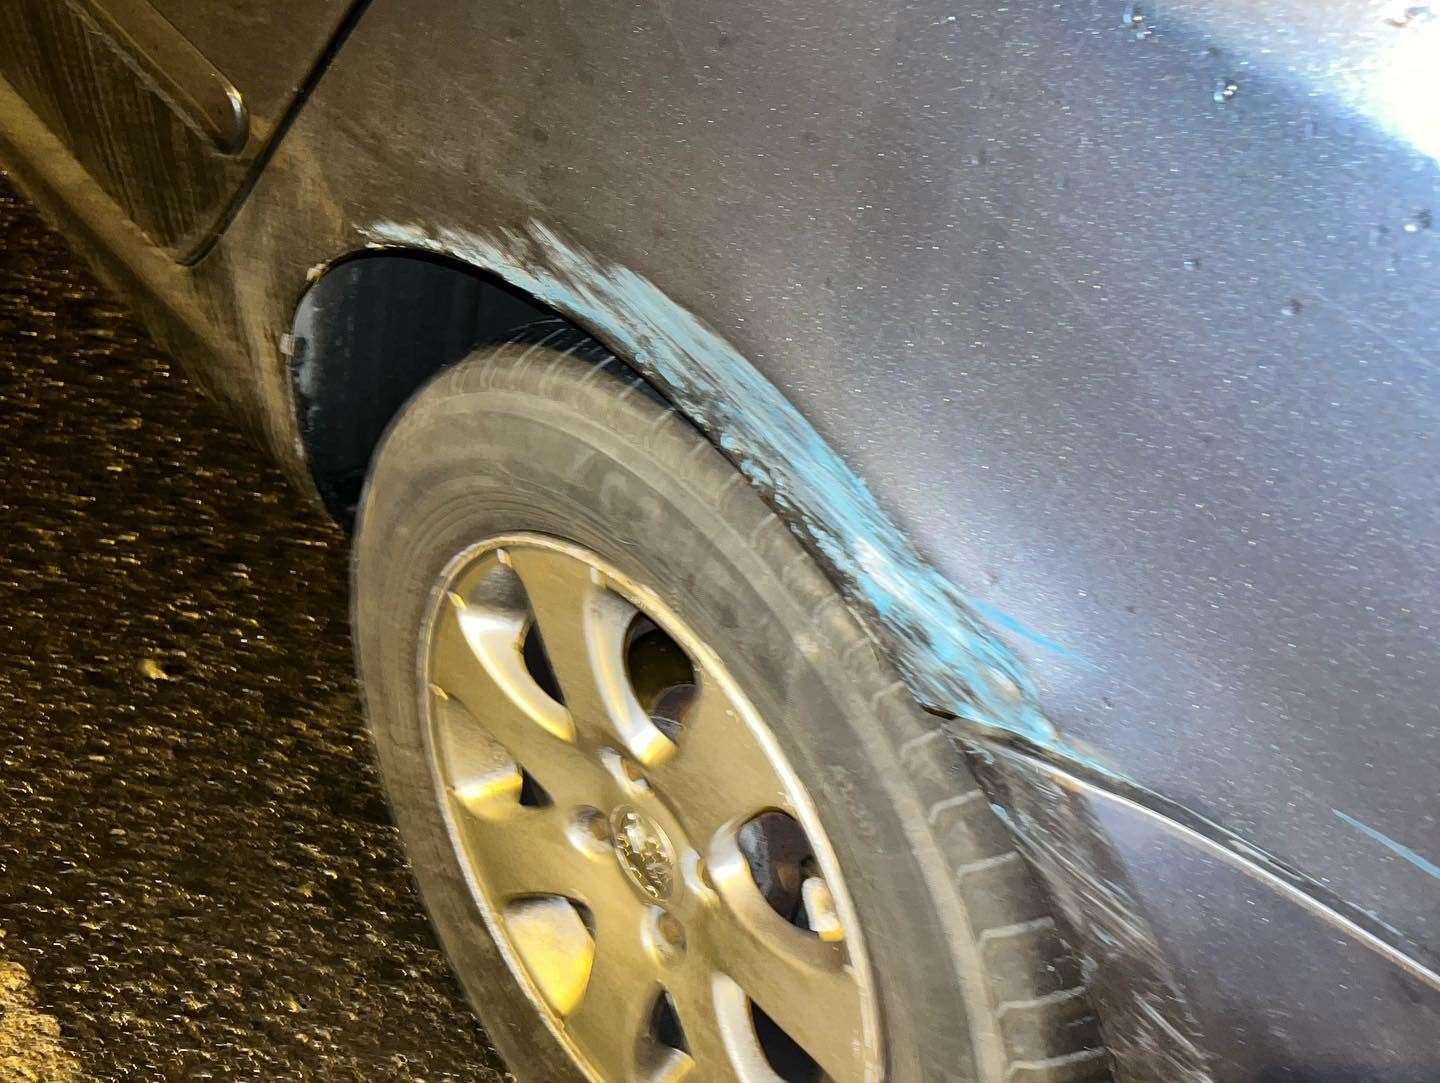 Scratches were left on the side of the car. Picture: Daniel Byrne